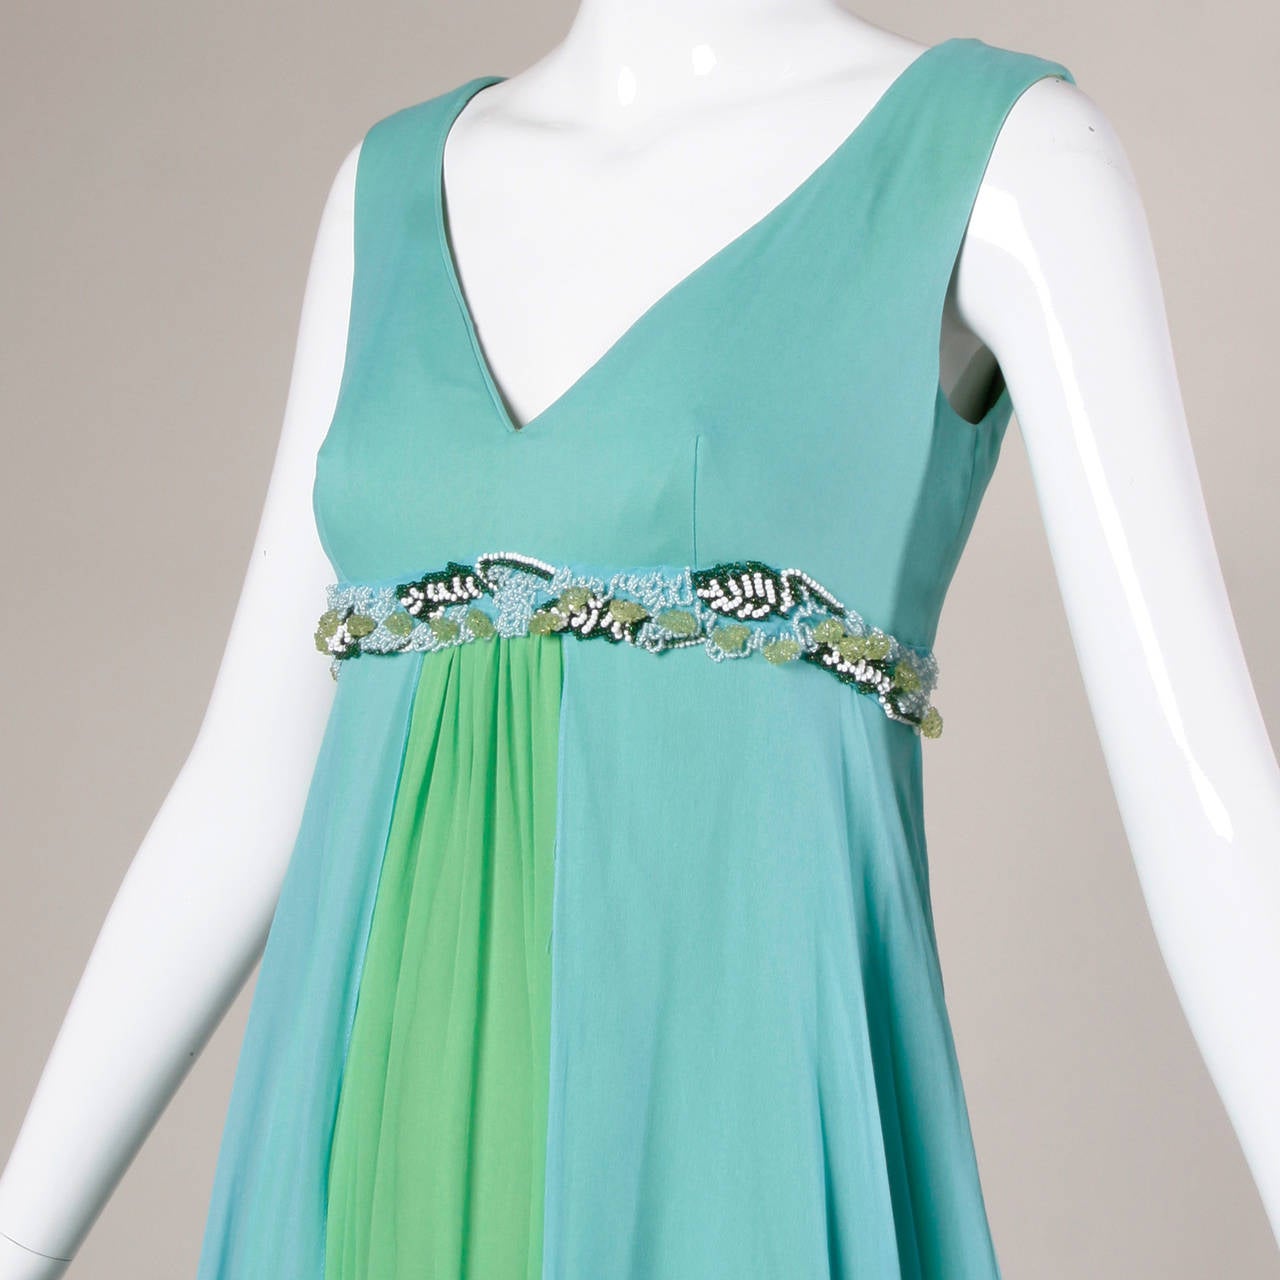 Unworn with the original tags still attached, 1971 green and blue color block gown with a beaded empire waist.

Details:

Fully Lined
Back Metal Zip and Hook Closure
Marked Size: 12
Estimated Size: Medium
Color: Sky Blue/ Bright Green